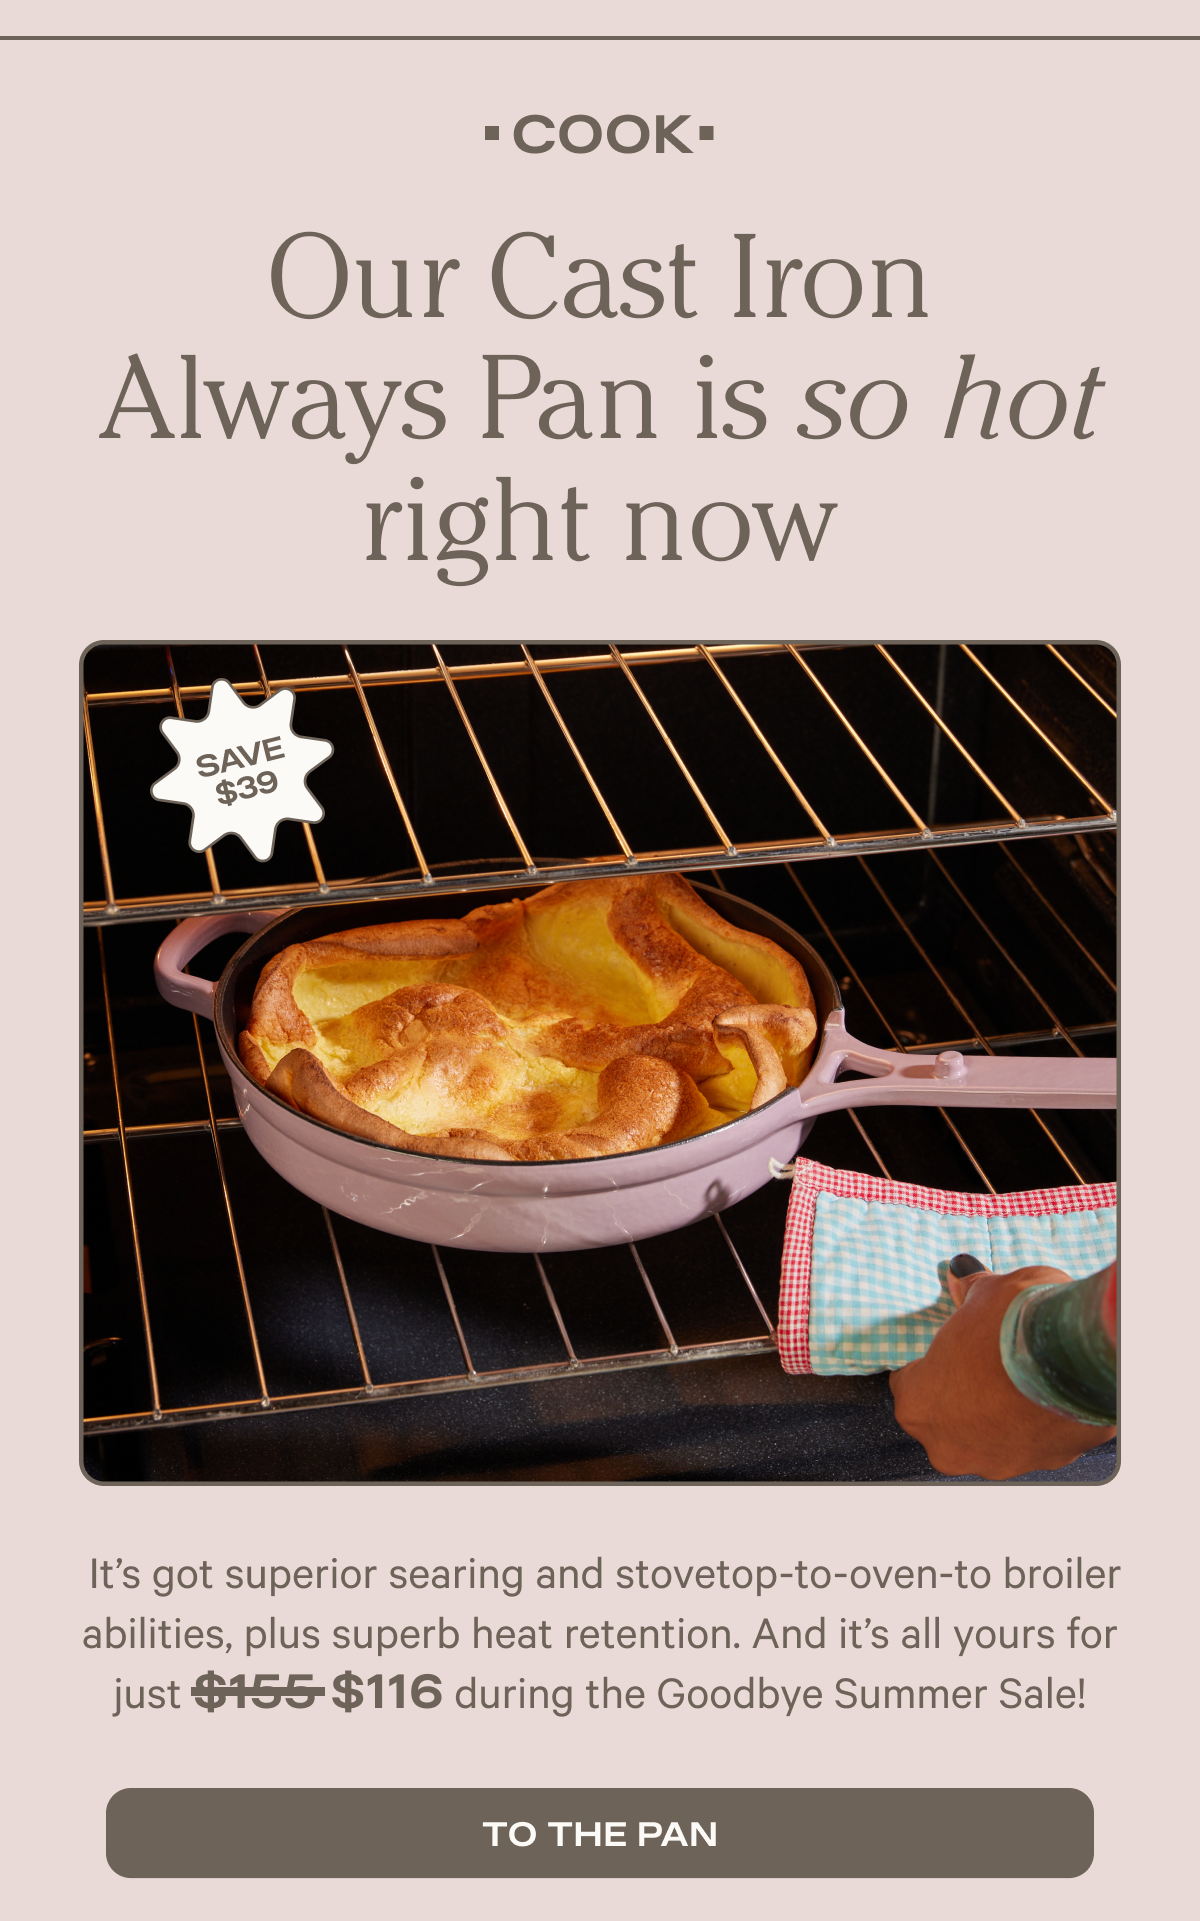 Cook - Our Cast Iron Always Pan is so hot right now - It’s got superior searing and stovetop-to-oven-to broiler abilities, plus superb heat retention. And it’s all yours for during the Goodbye Summer Sale! - to the pan